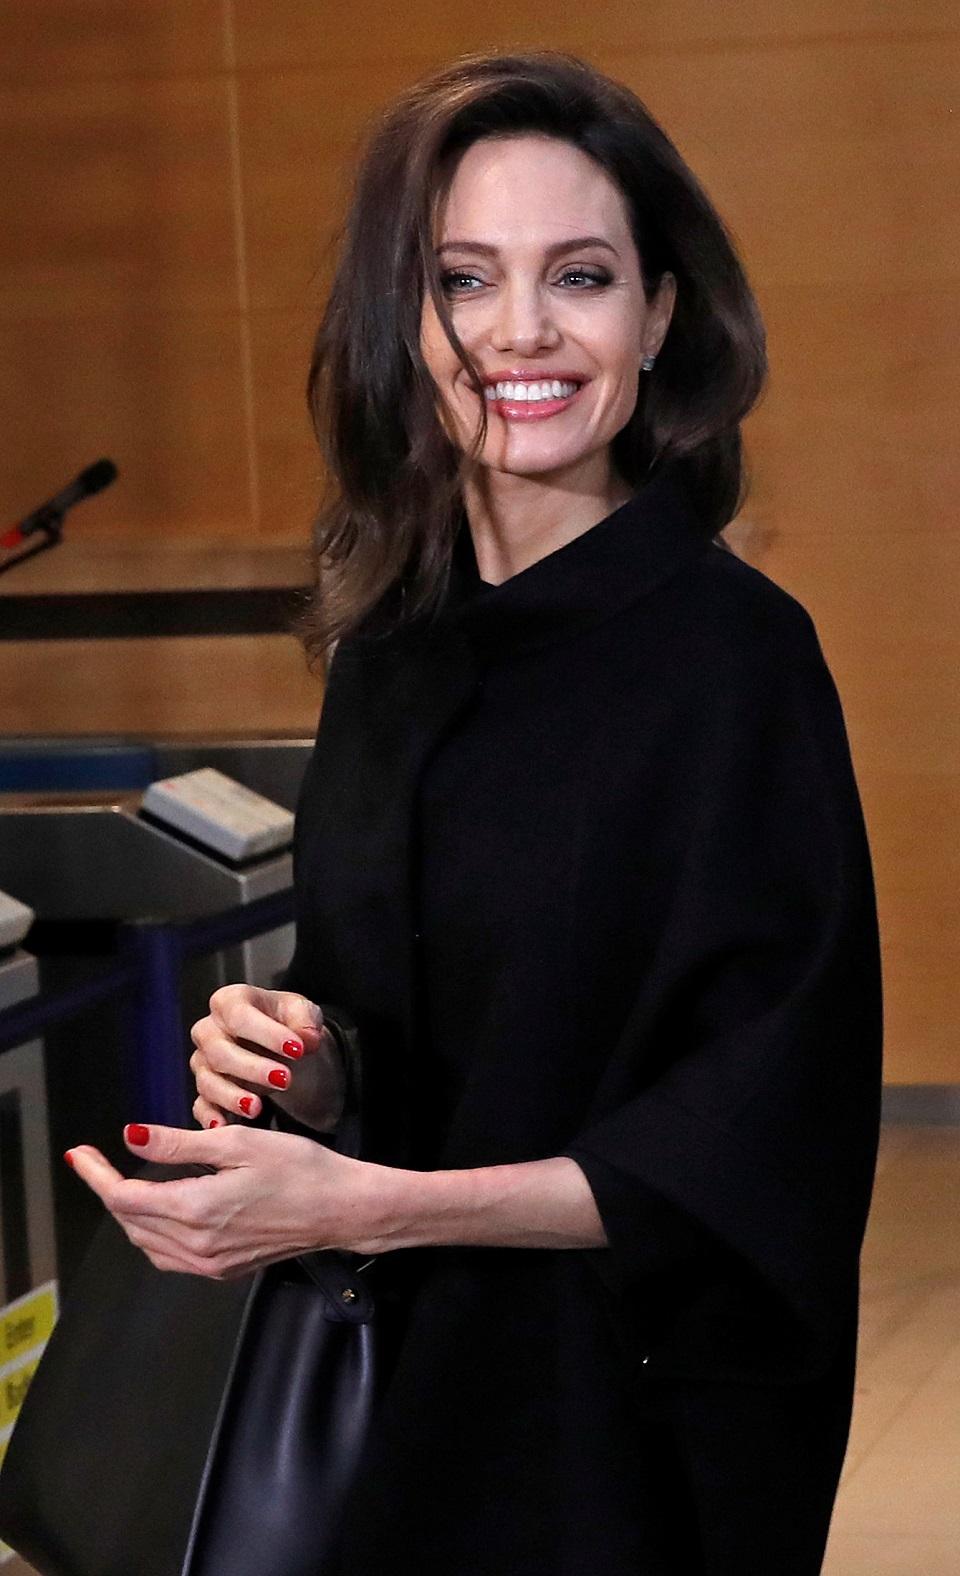 UNHCR Special Envoy Angelina Jolie waves after a news conference at NATO headquarters in Brussels, Belgium, January 31, 2018. REUTERS/Yves Herman